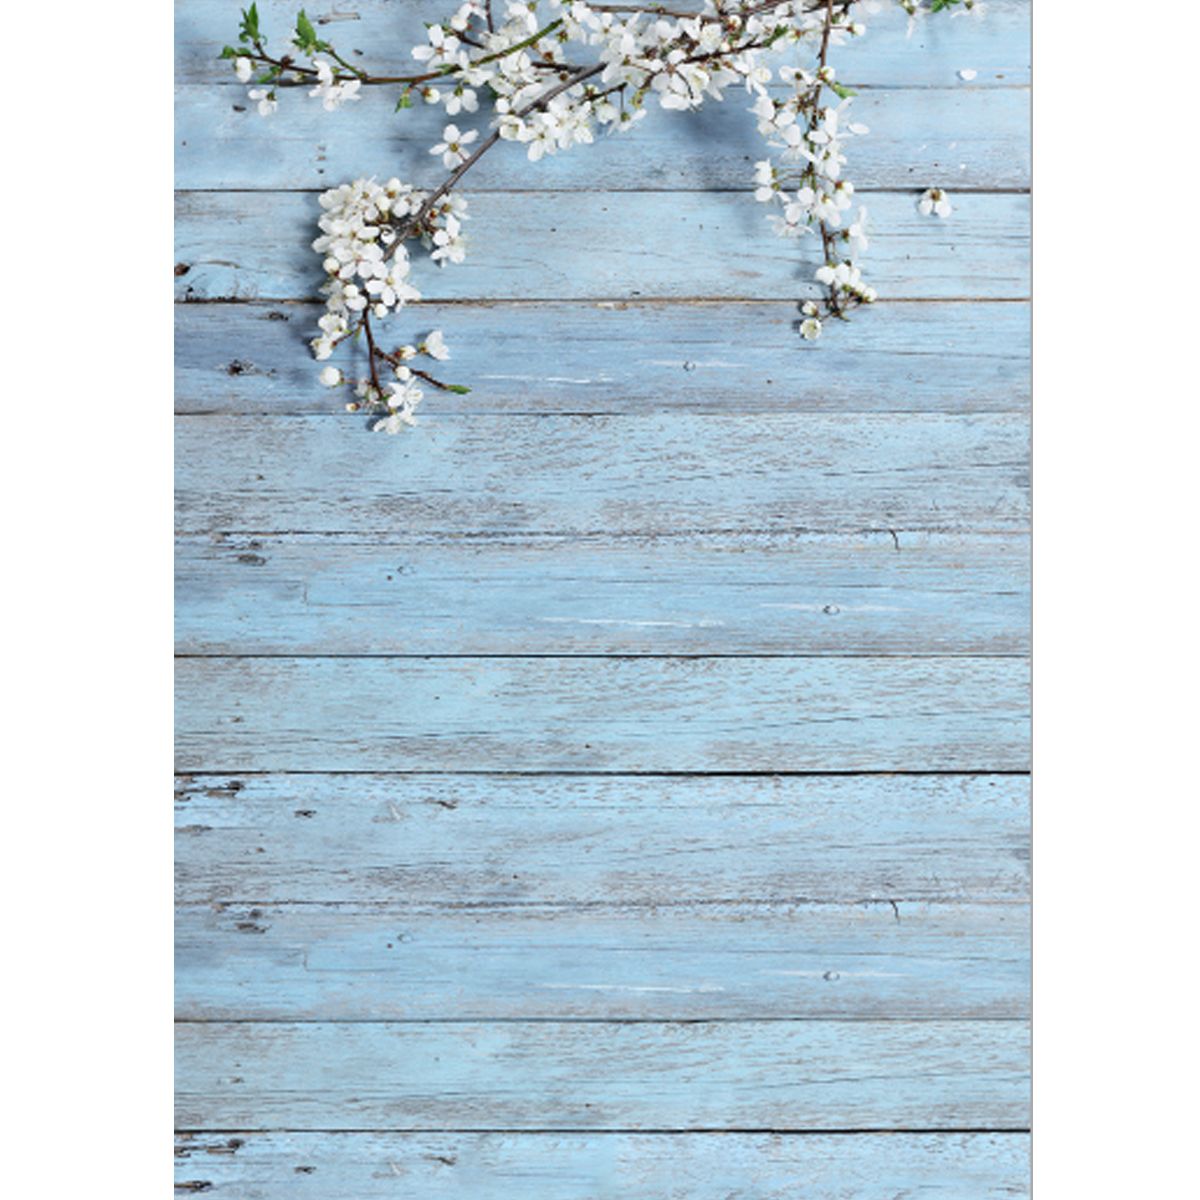 3x5FT-White-Flower-Blue-Wood-Wall-Photography-Backdrop-Studio-Prop-Background-1394515